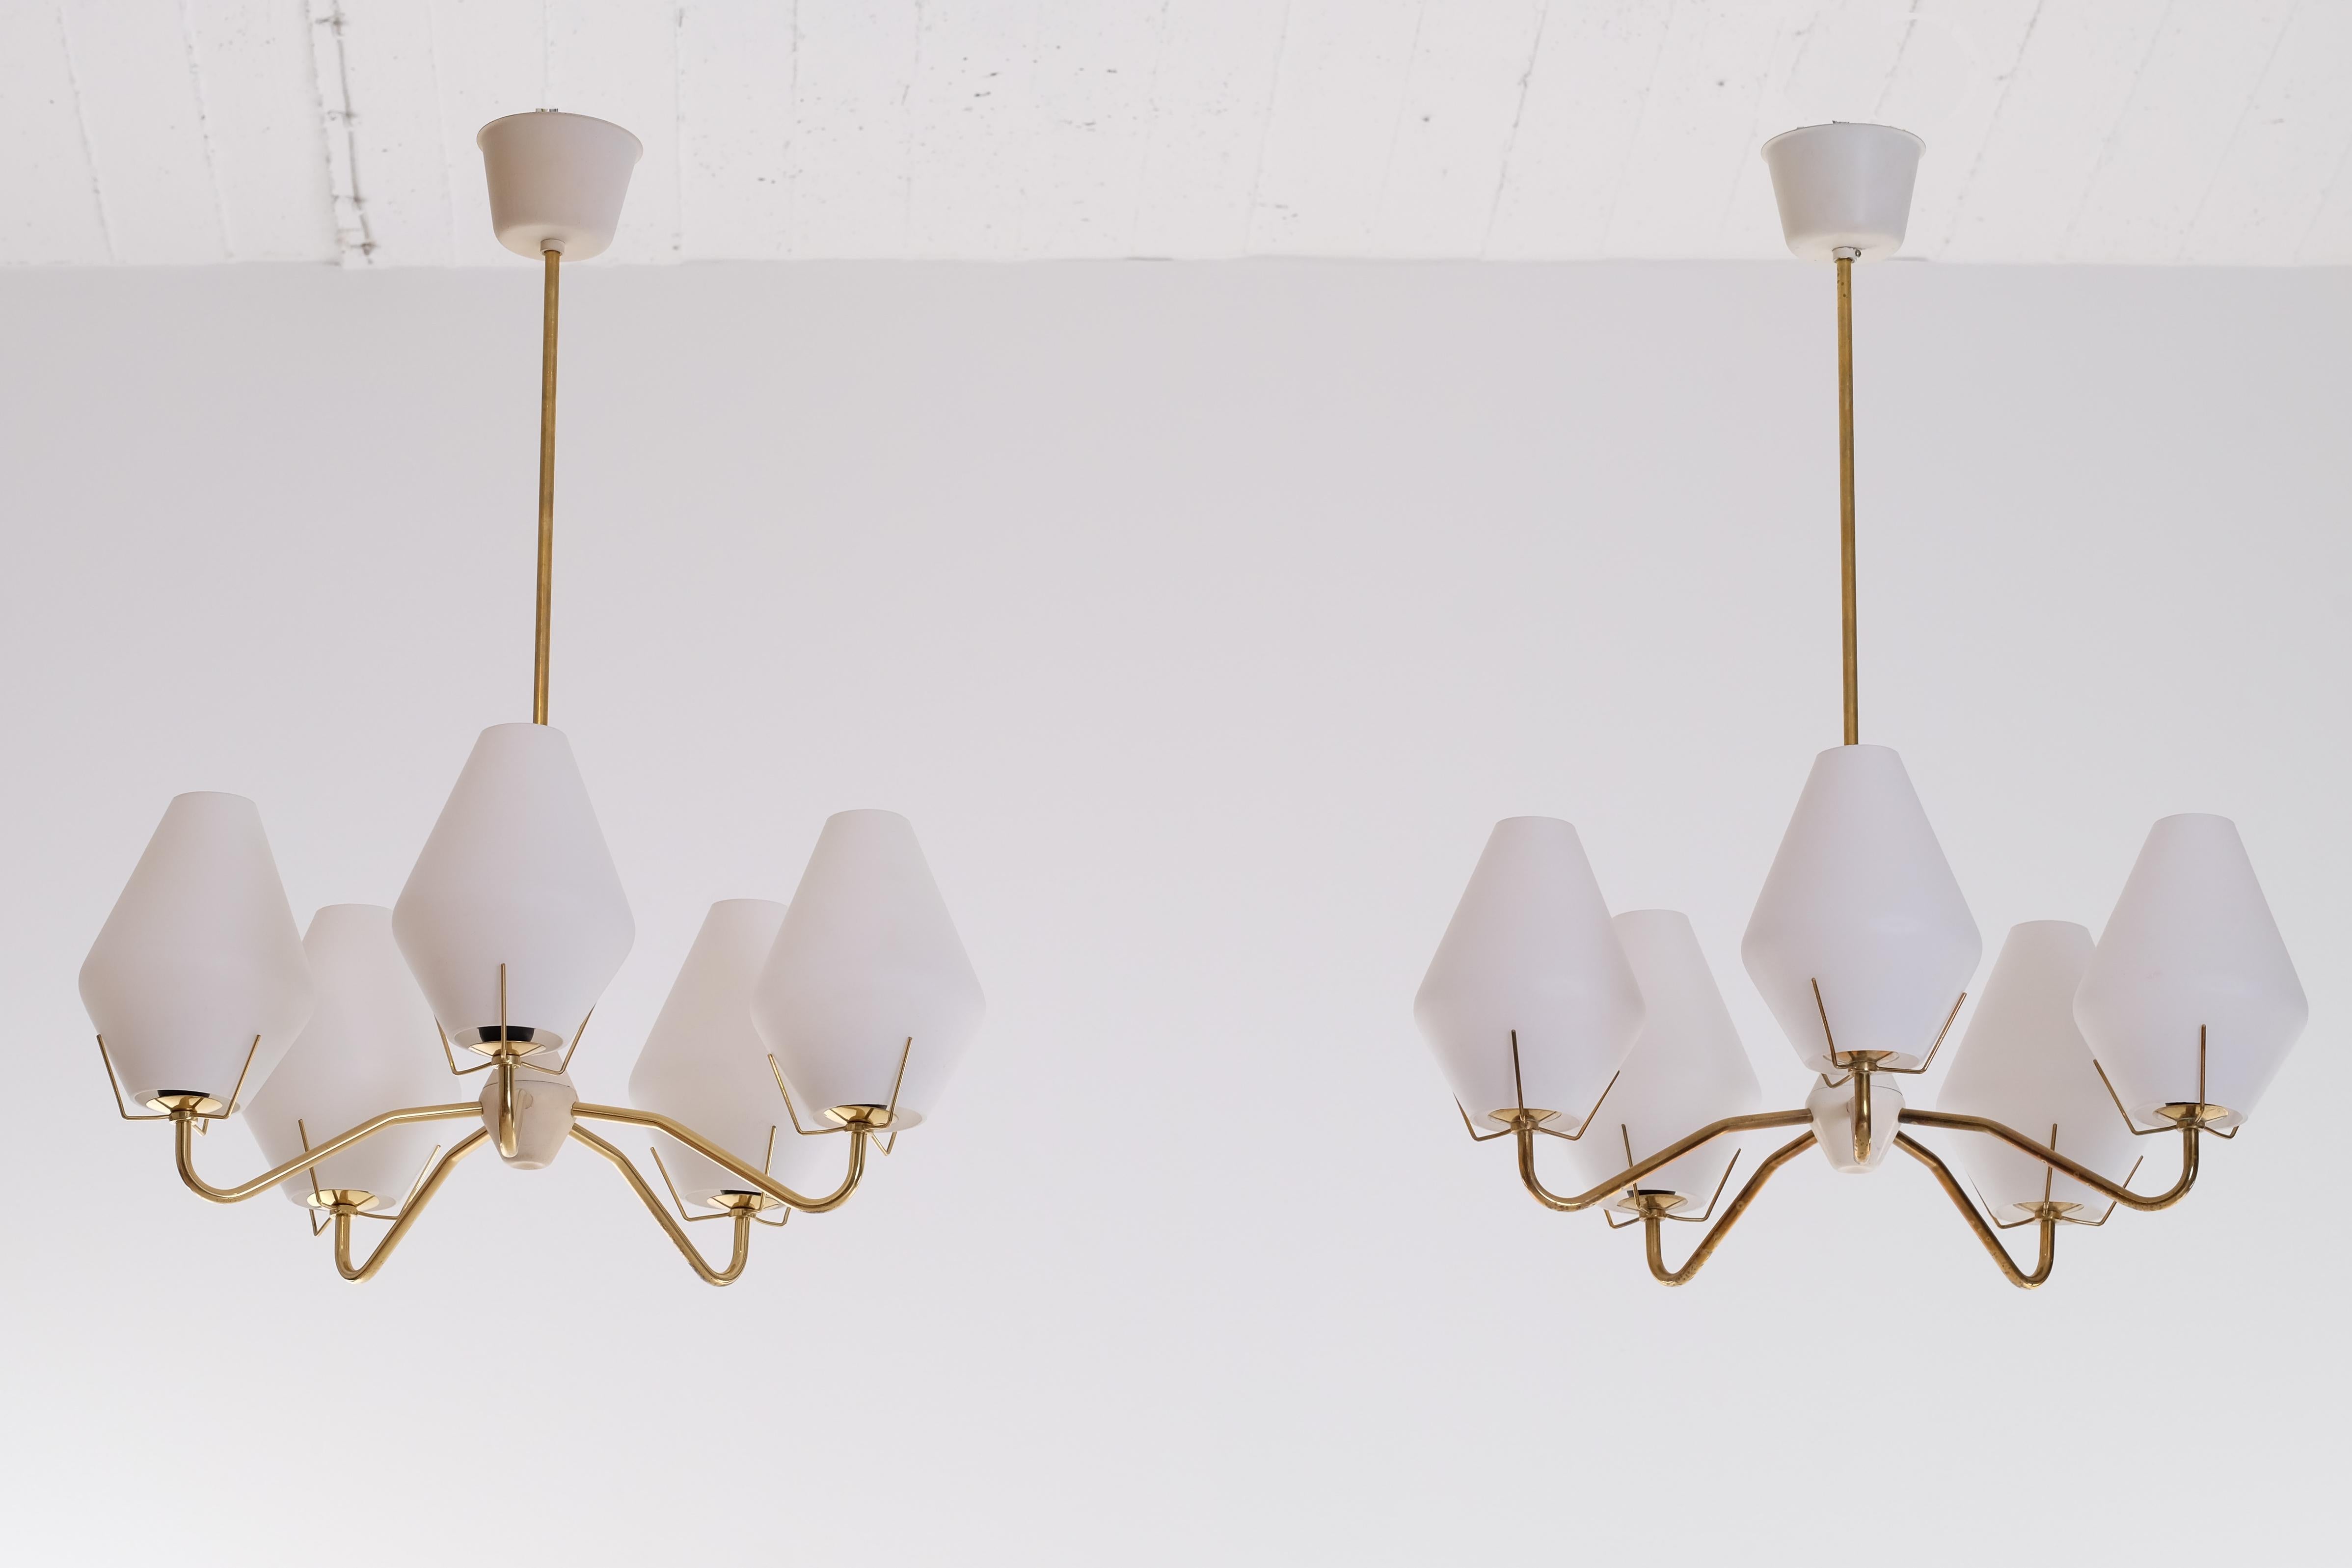 Set of 2 Brass Chandeliers by ASEA, Sweden, 1950s For Sale 1